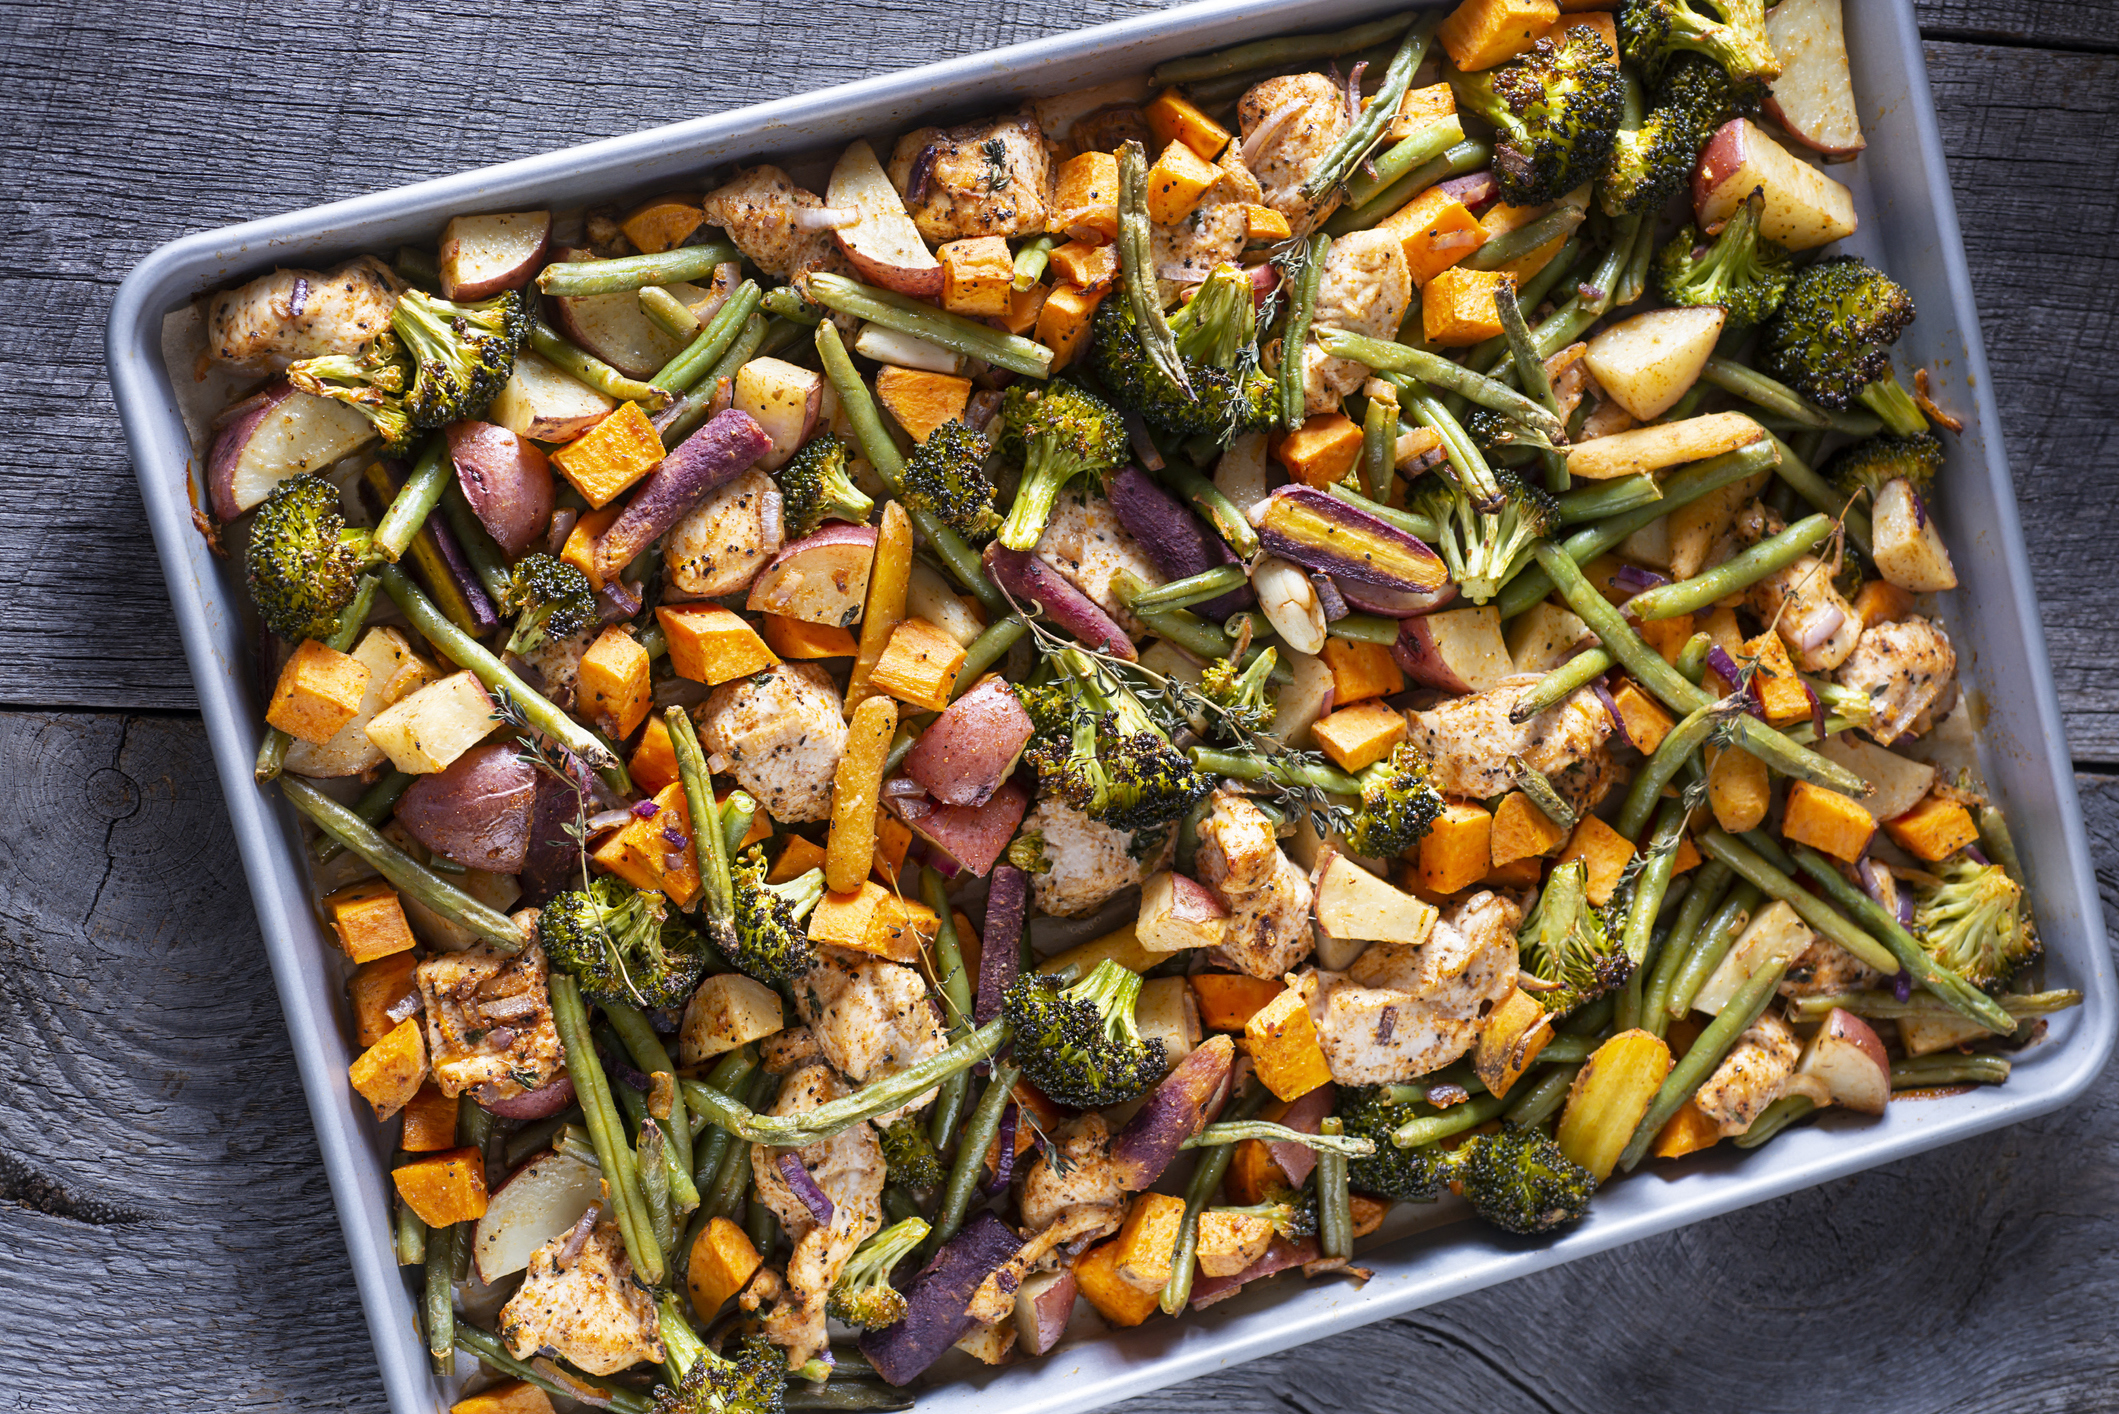 7 Sheet Pan Recipes That’ll Make Your Weekday Meals a Breeze